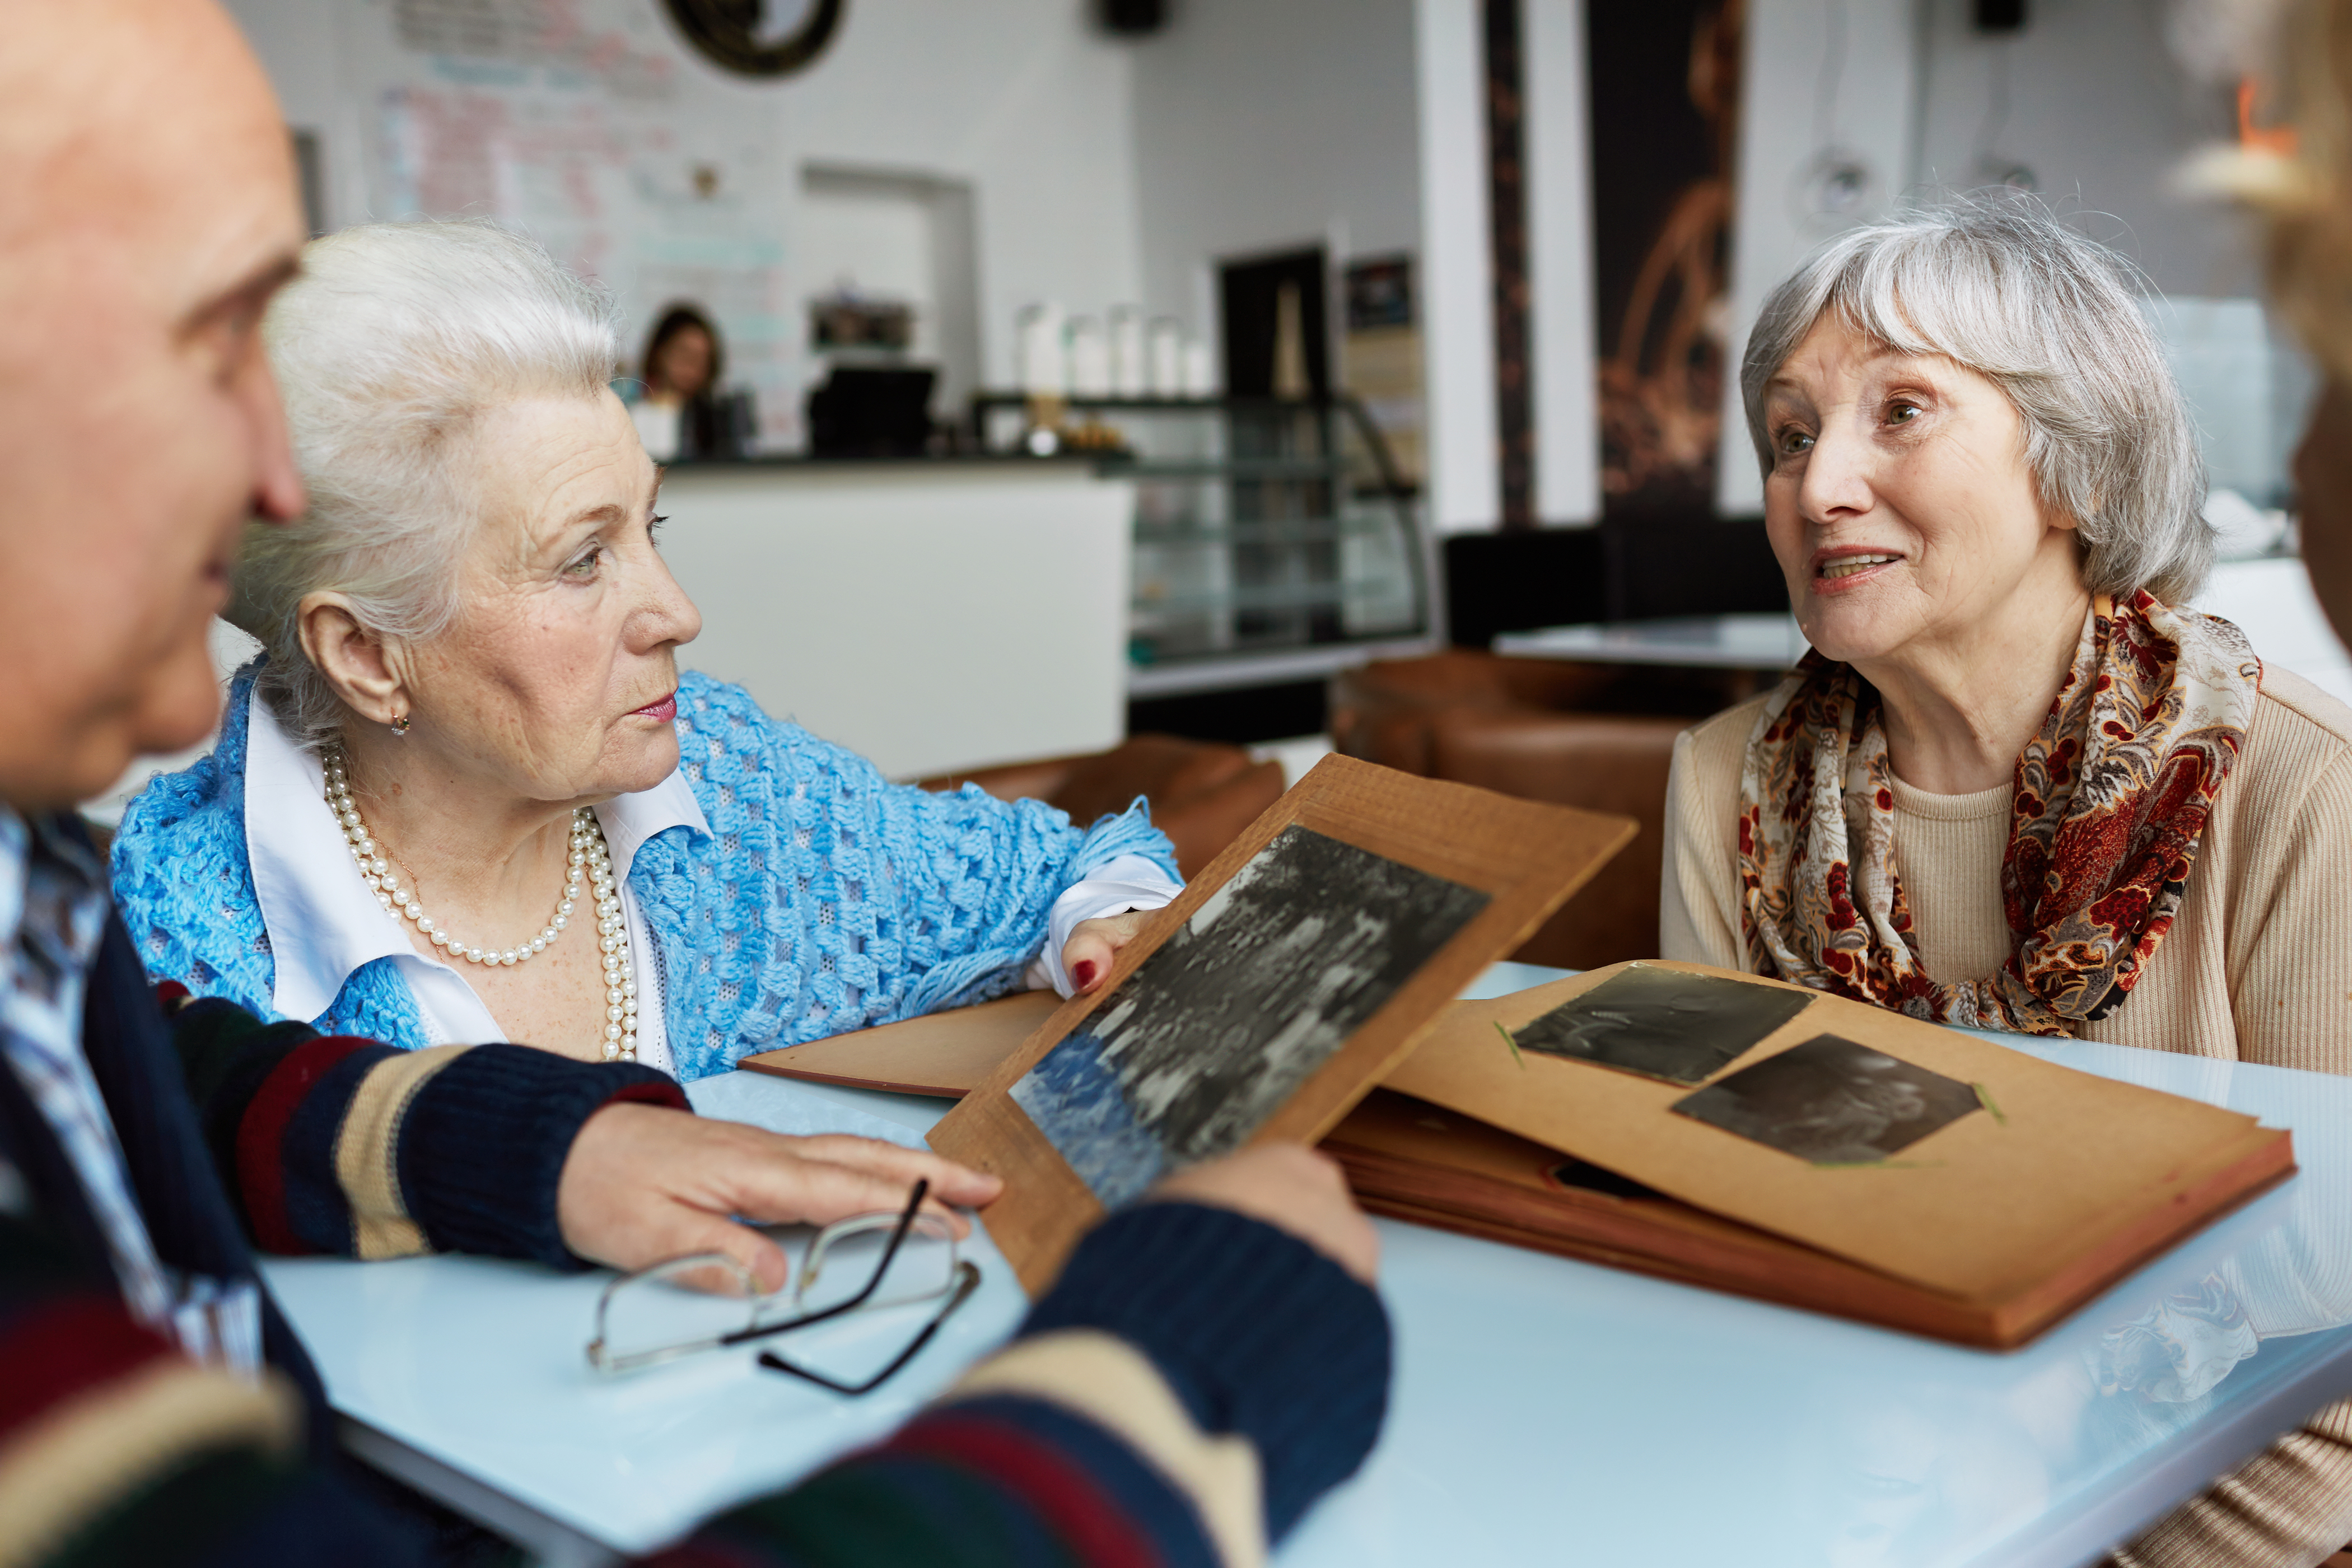 Friendly seniors talking while looking through photographs in a cafe